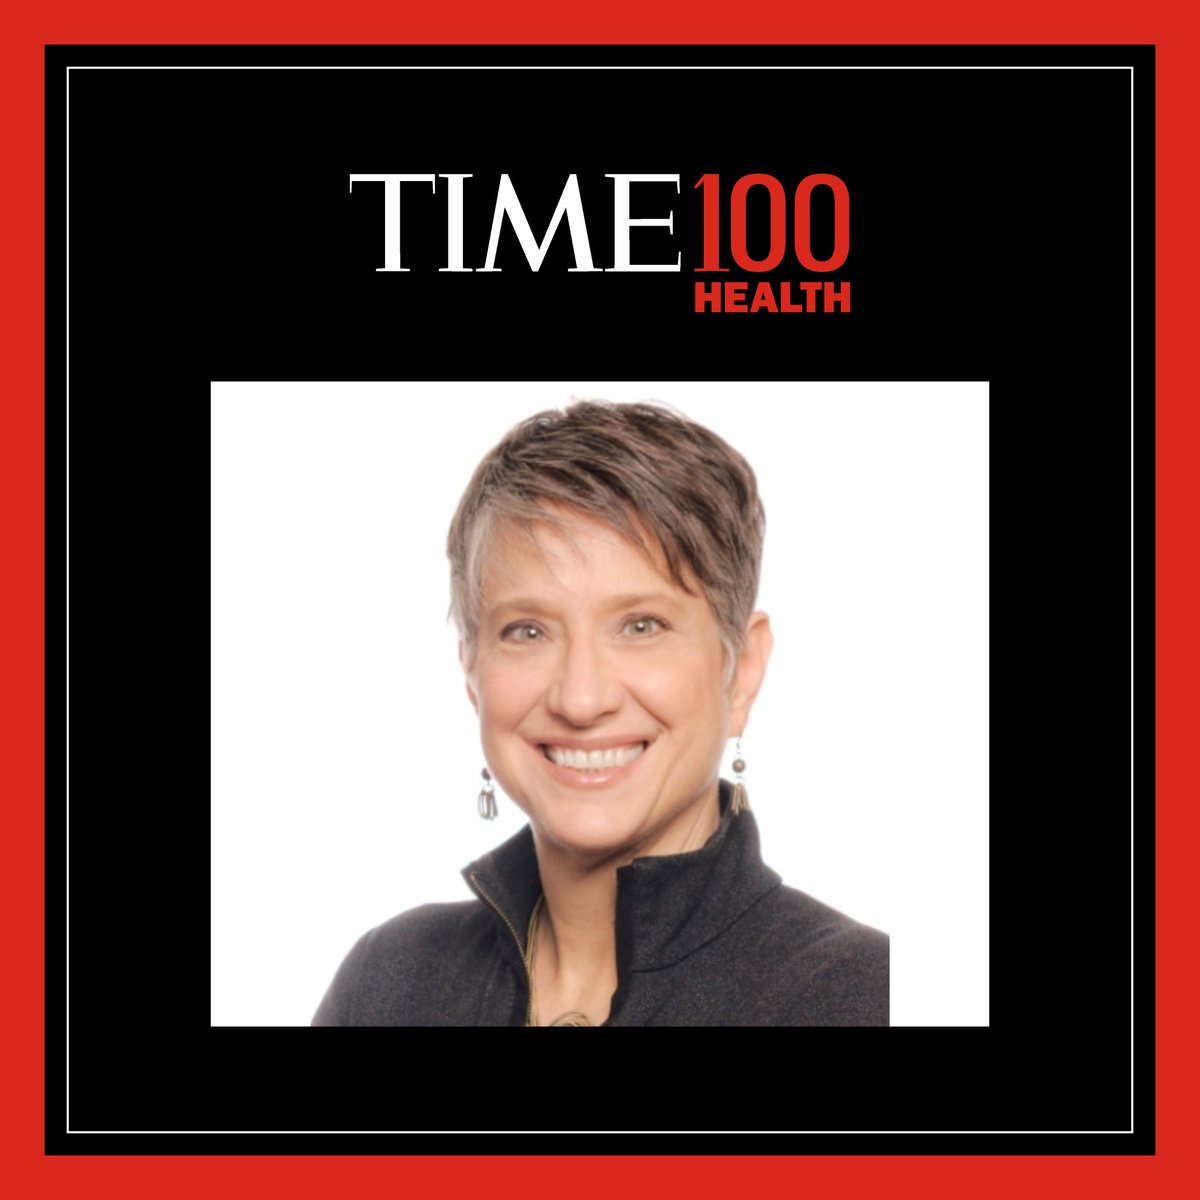 Congratulations to @KimMNolte, our CEO! She’s been honored by TIME magazine as one of the 100 most influential people in global health through their inaugural #TIME100Health award! See the full list now at time.com/time100health.🎉🎉#HealthJustice #MigrantHealth